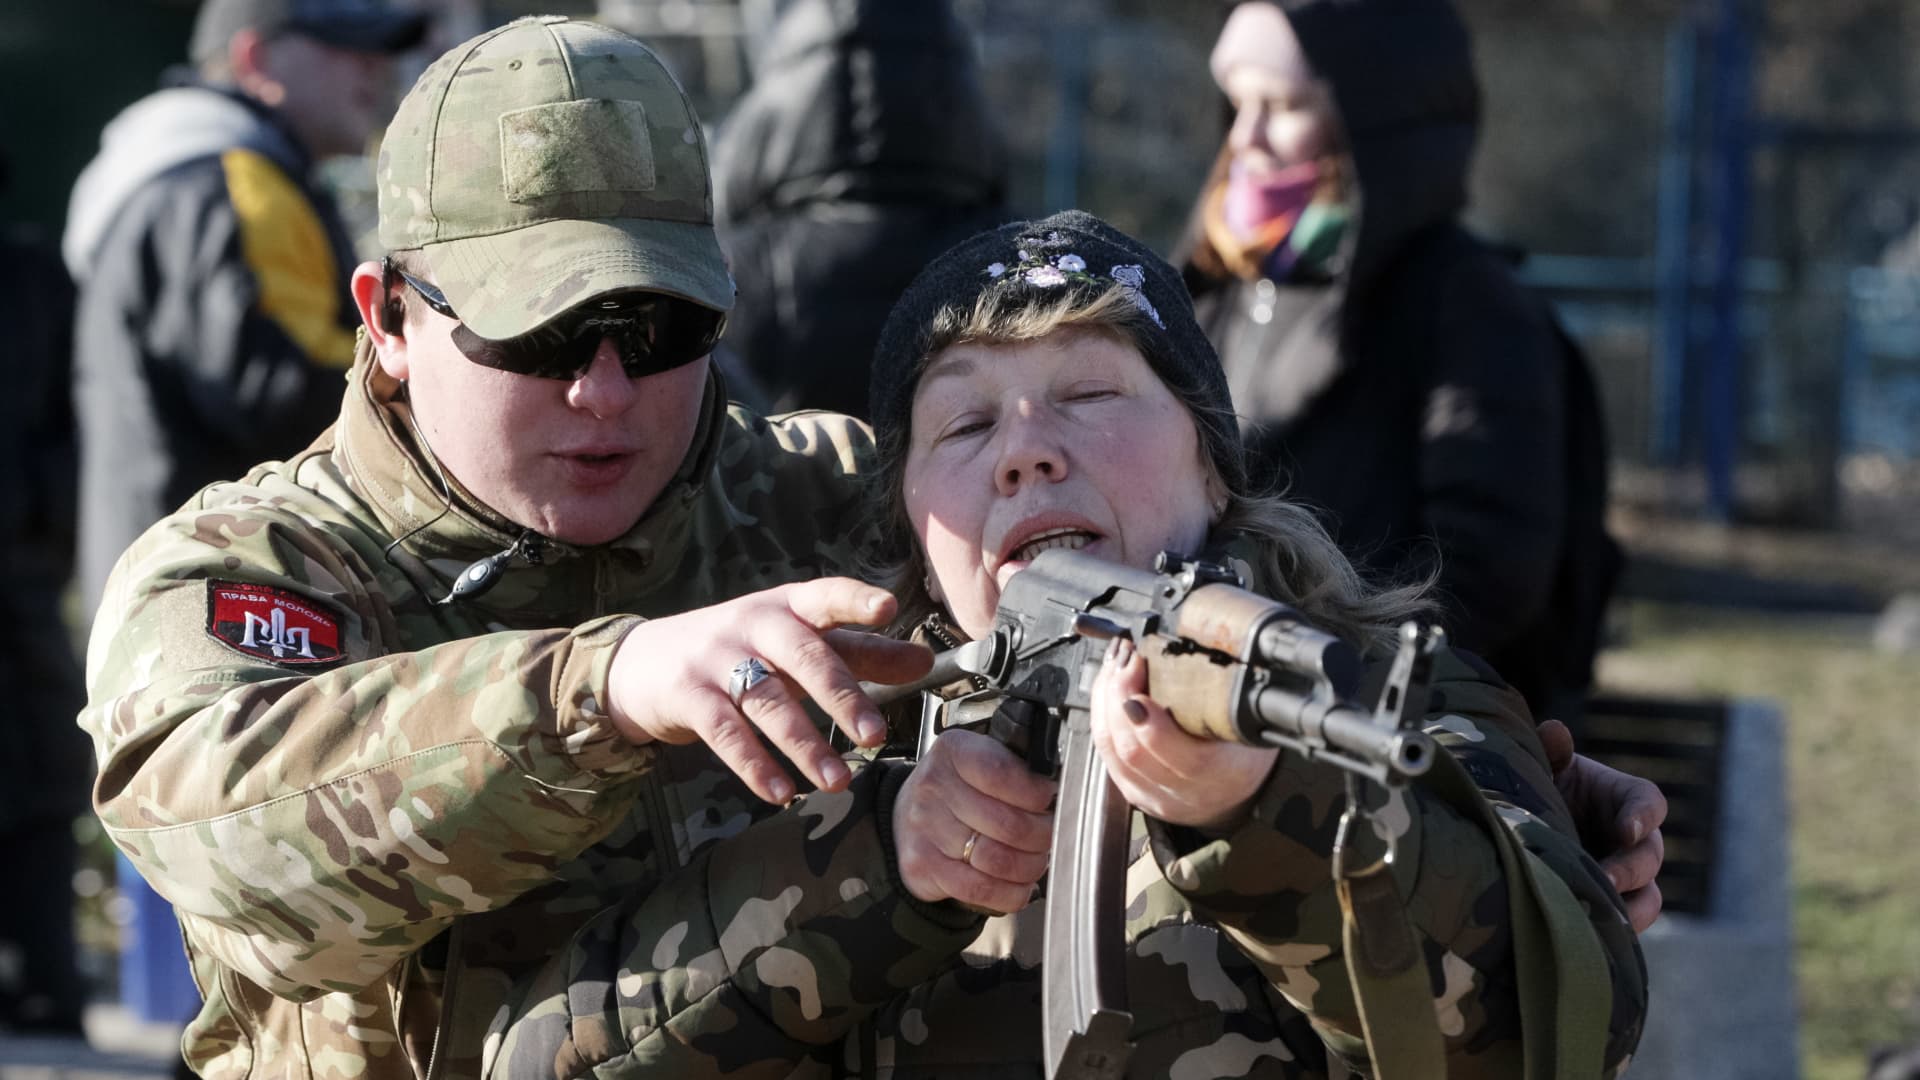 An 'Right Sector' instructor shows a civilian woman how to use an assault rifle Kalashnikov during a military exercise for territorial defense amid the tension on the border with Russia, in Ukrainian capital Kyiv, Ukraine 13 February 2022.